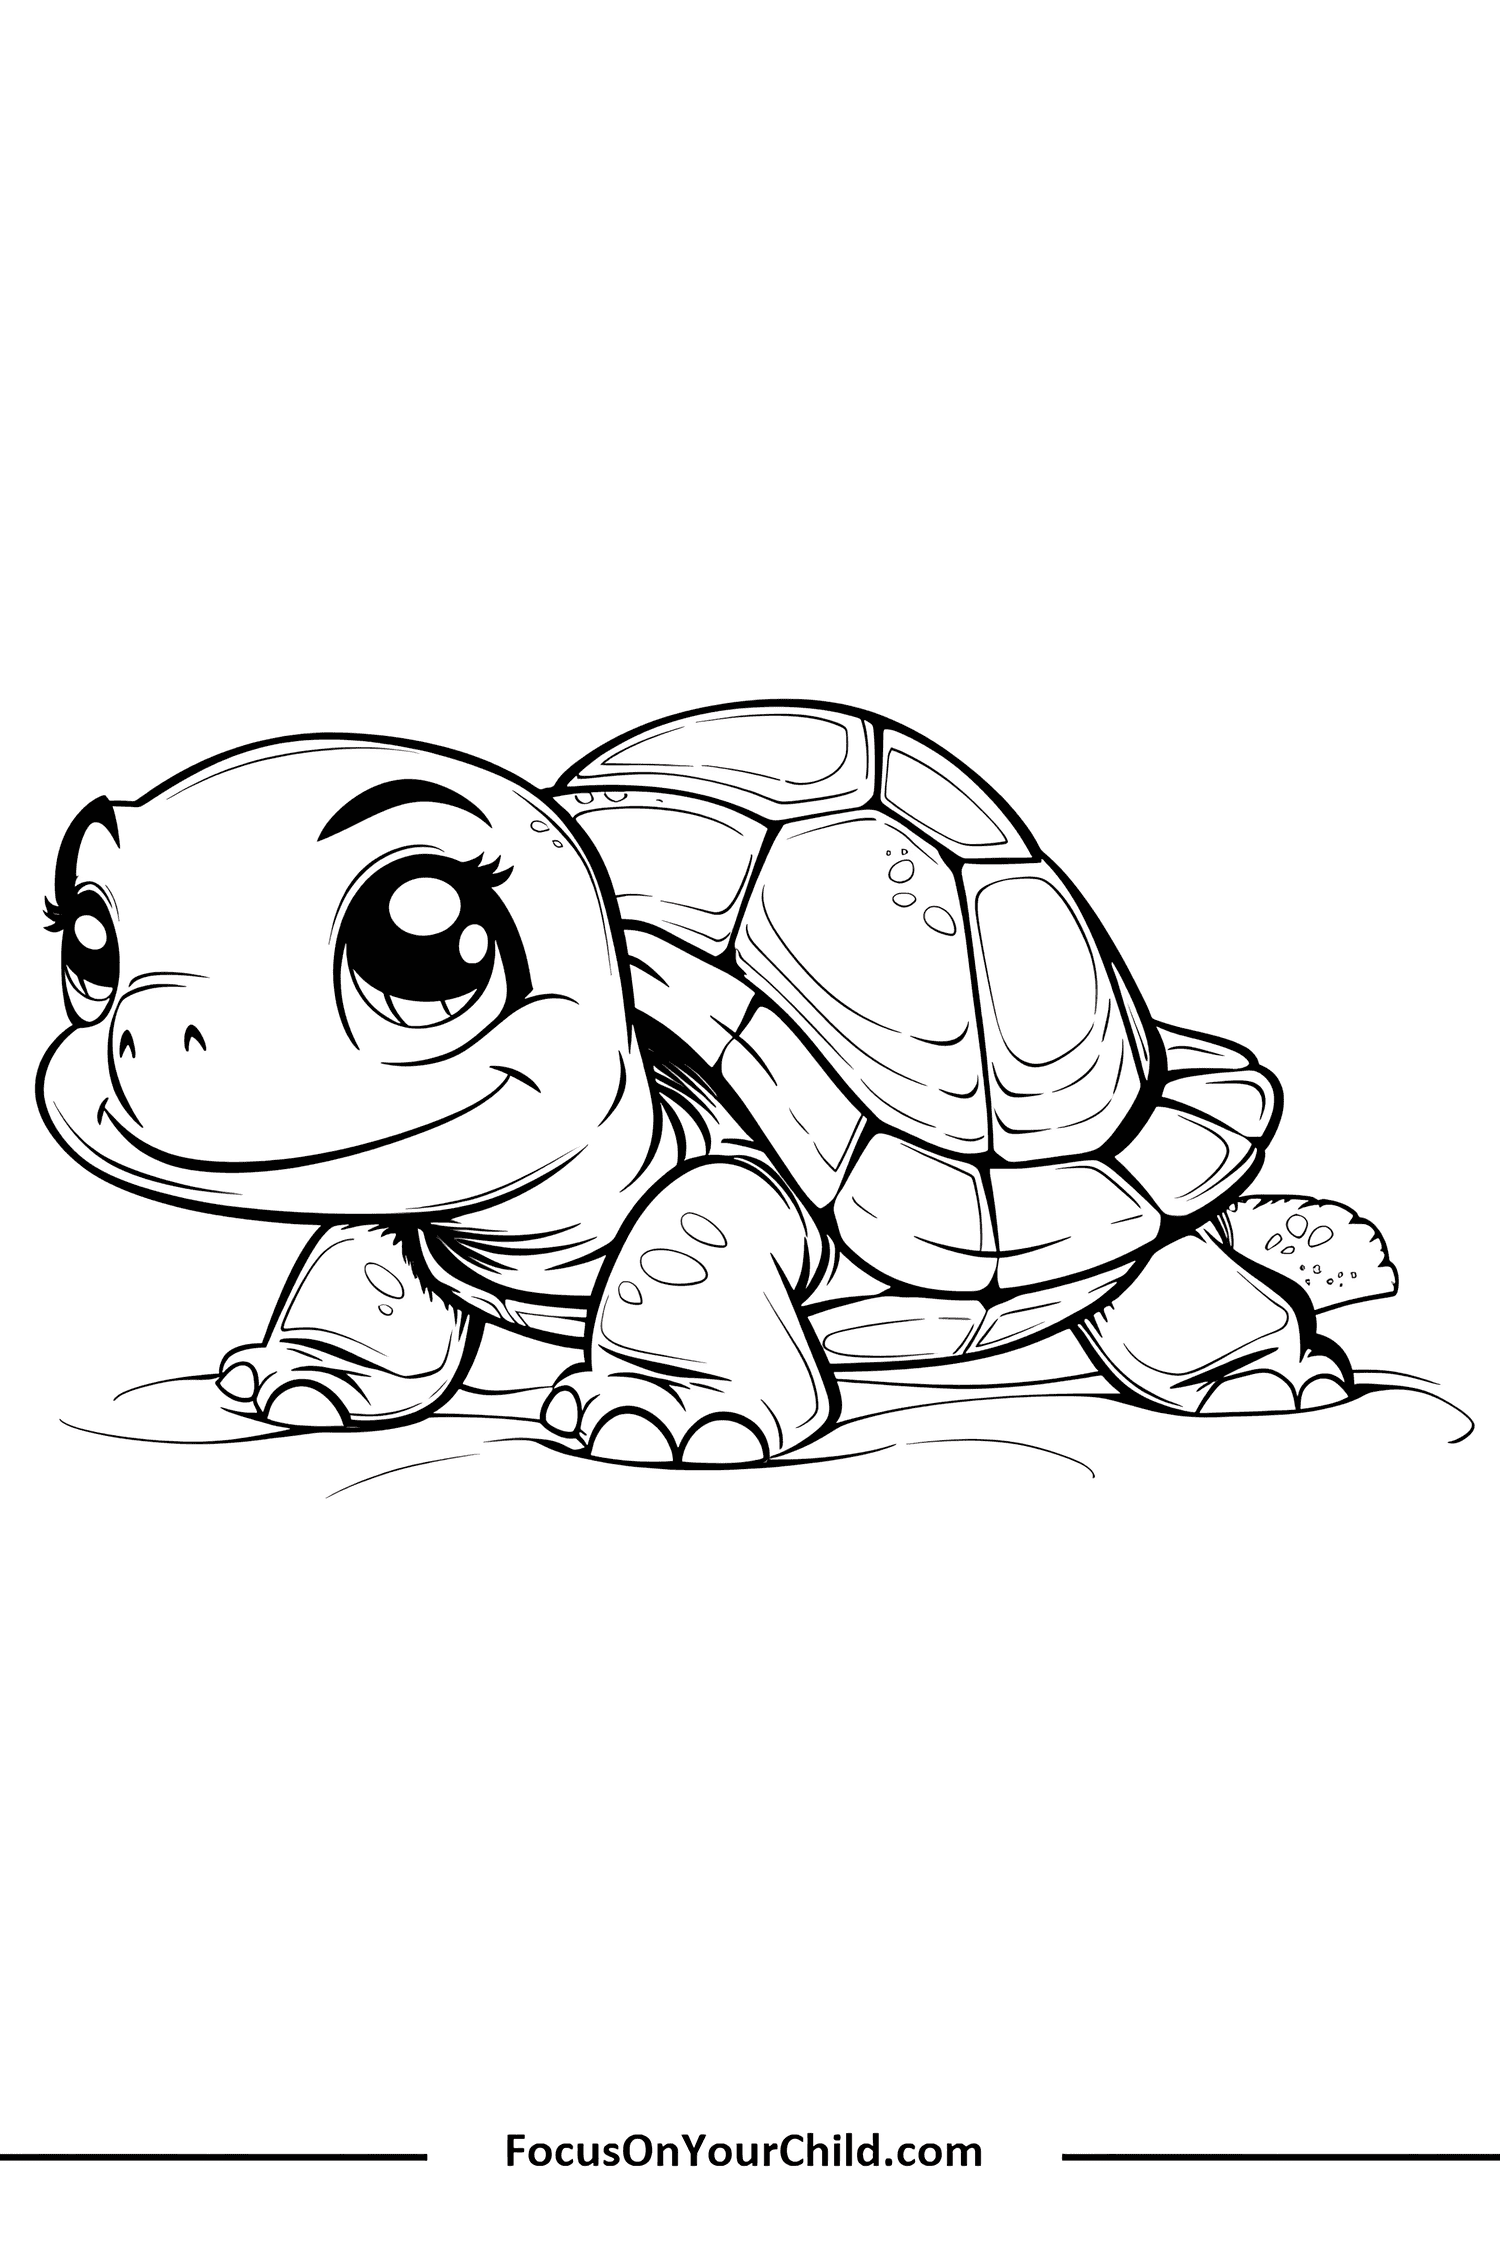 Adorable baby turtle drawing for FocusOnYourChild.com promotional material.